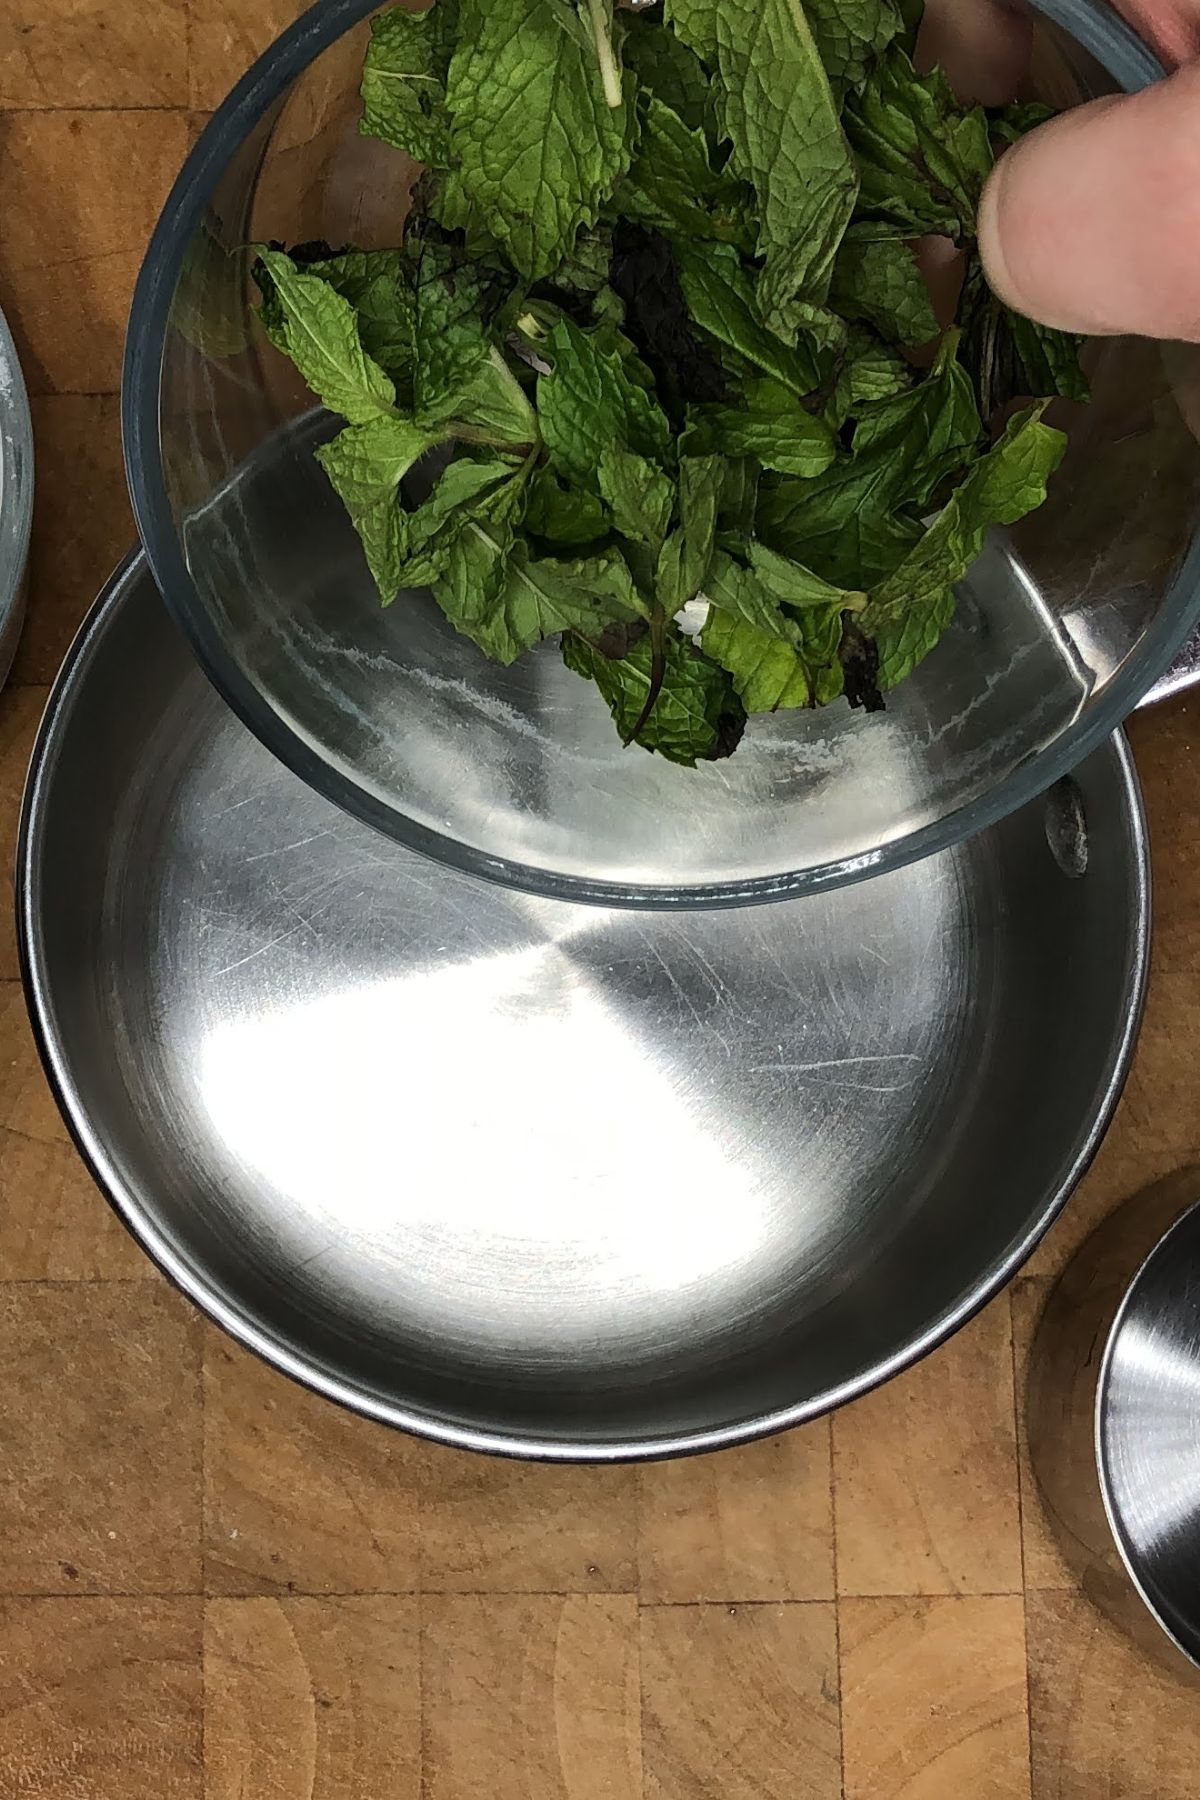 Pouring mint leaves into a pot.